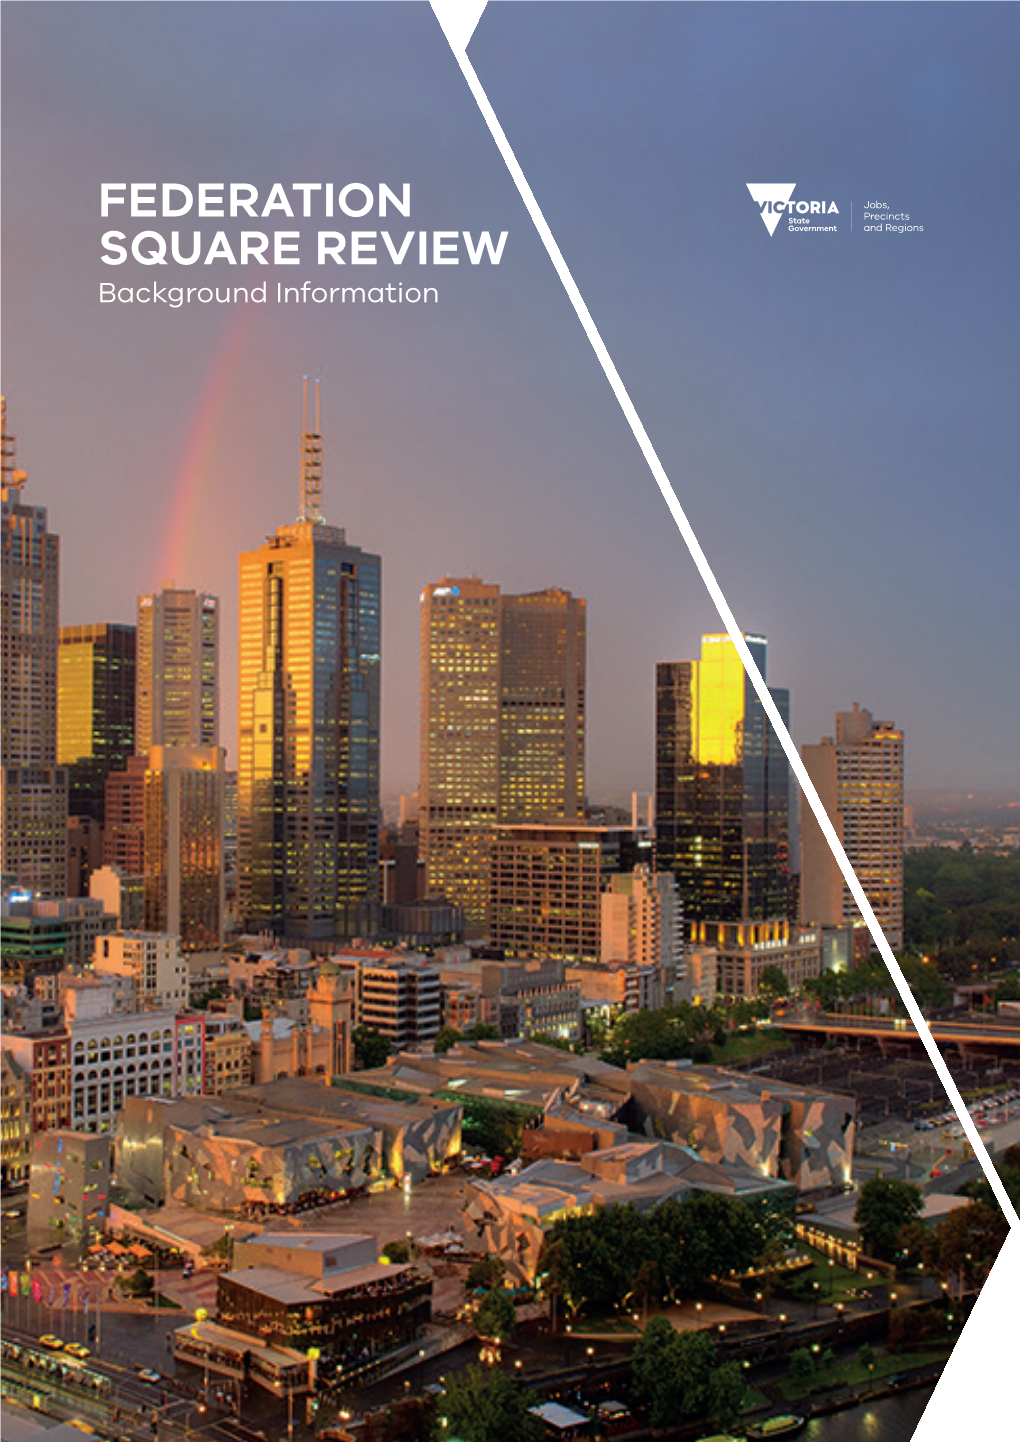 FEDERATION SQUARE REVIEW Background Information